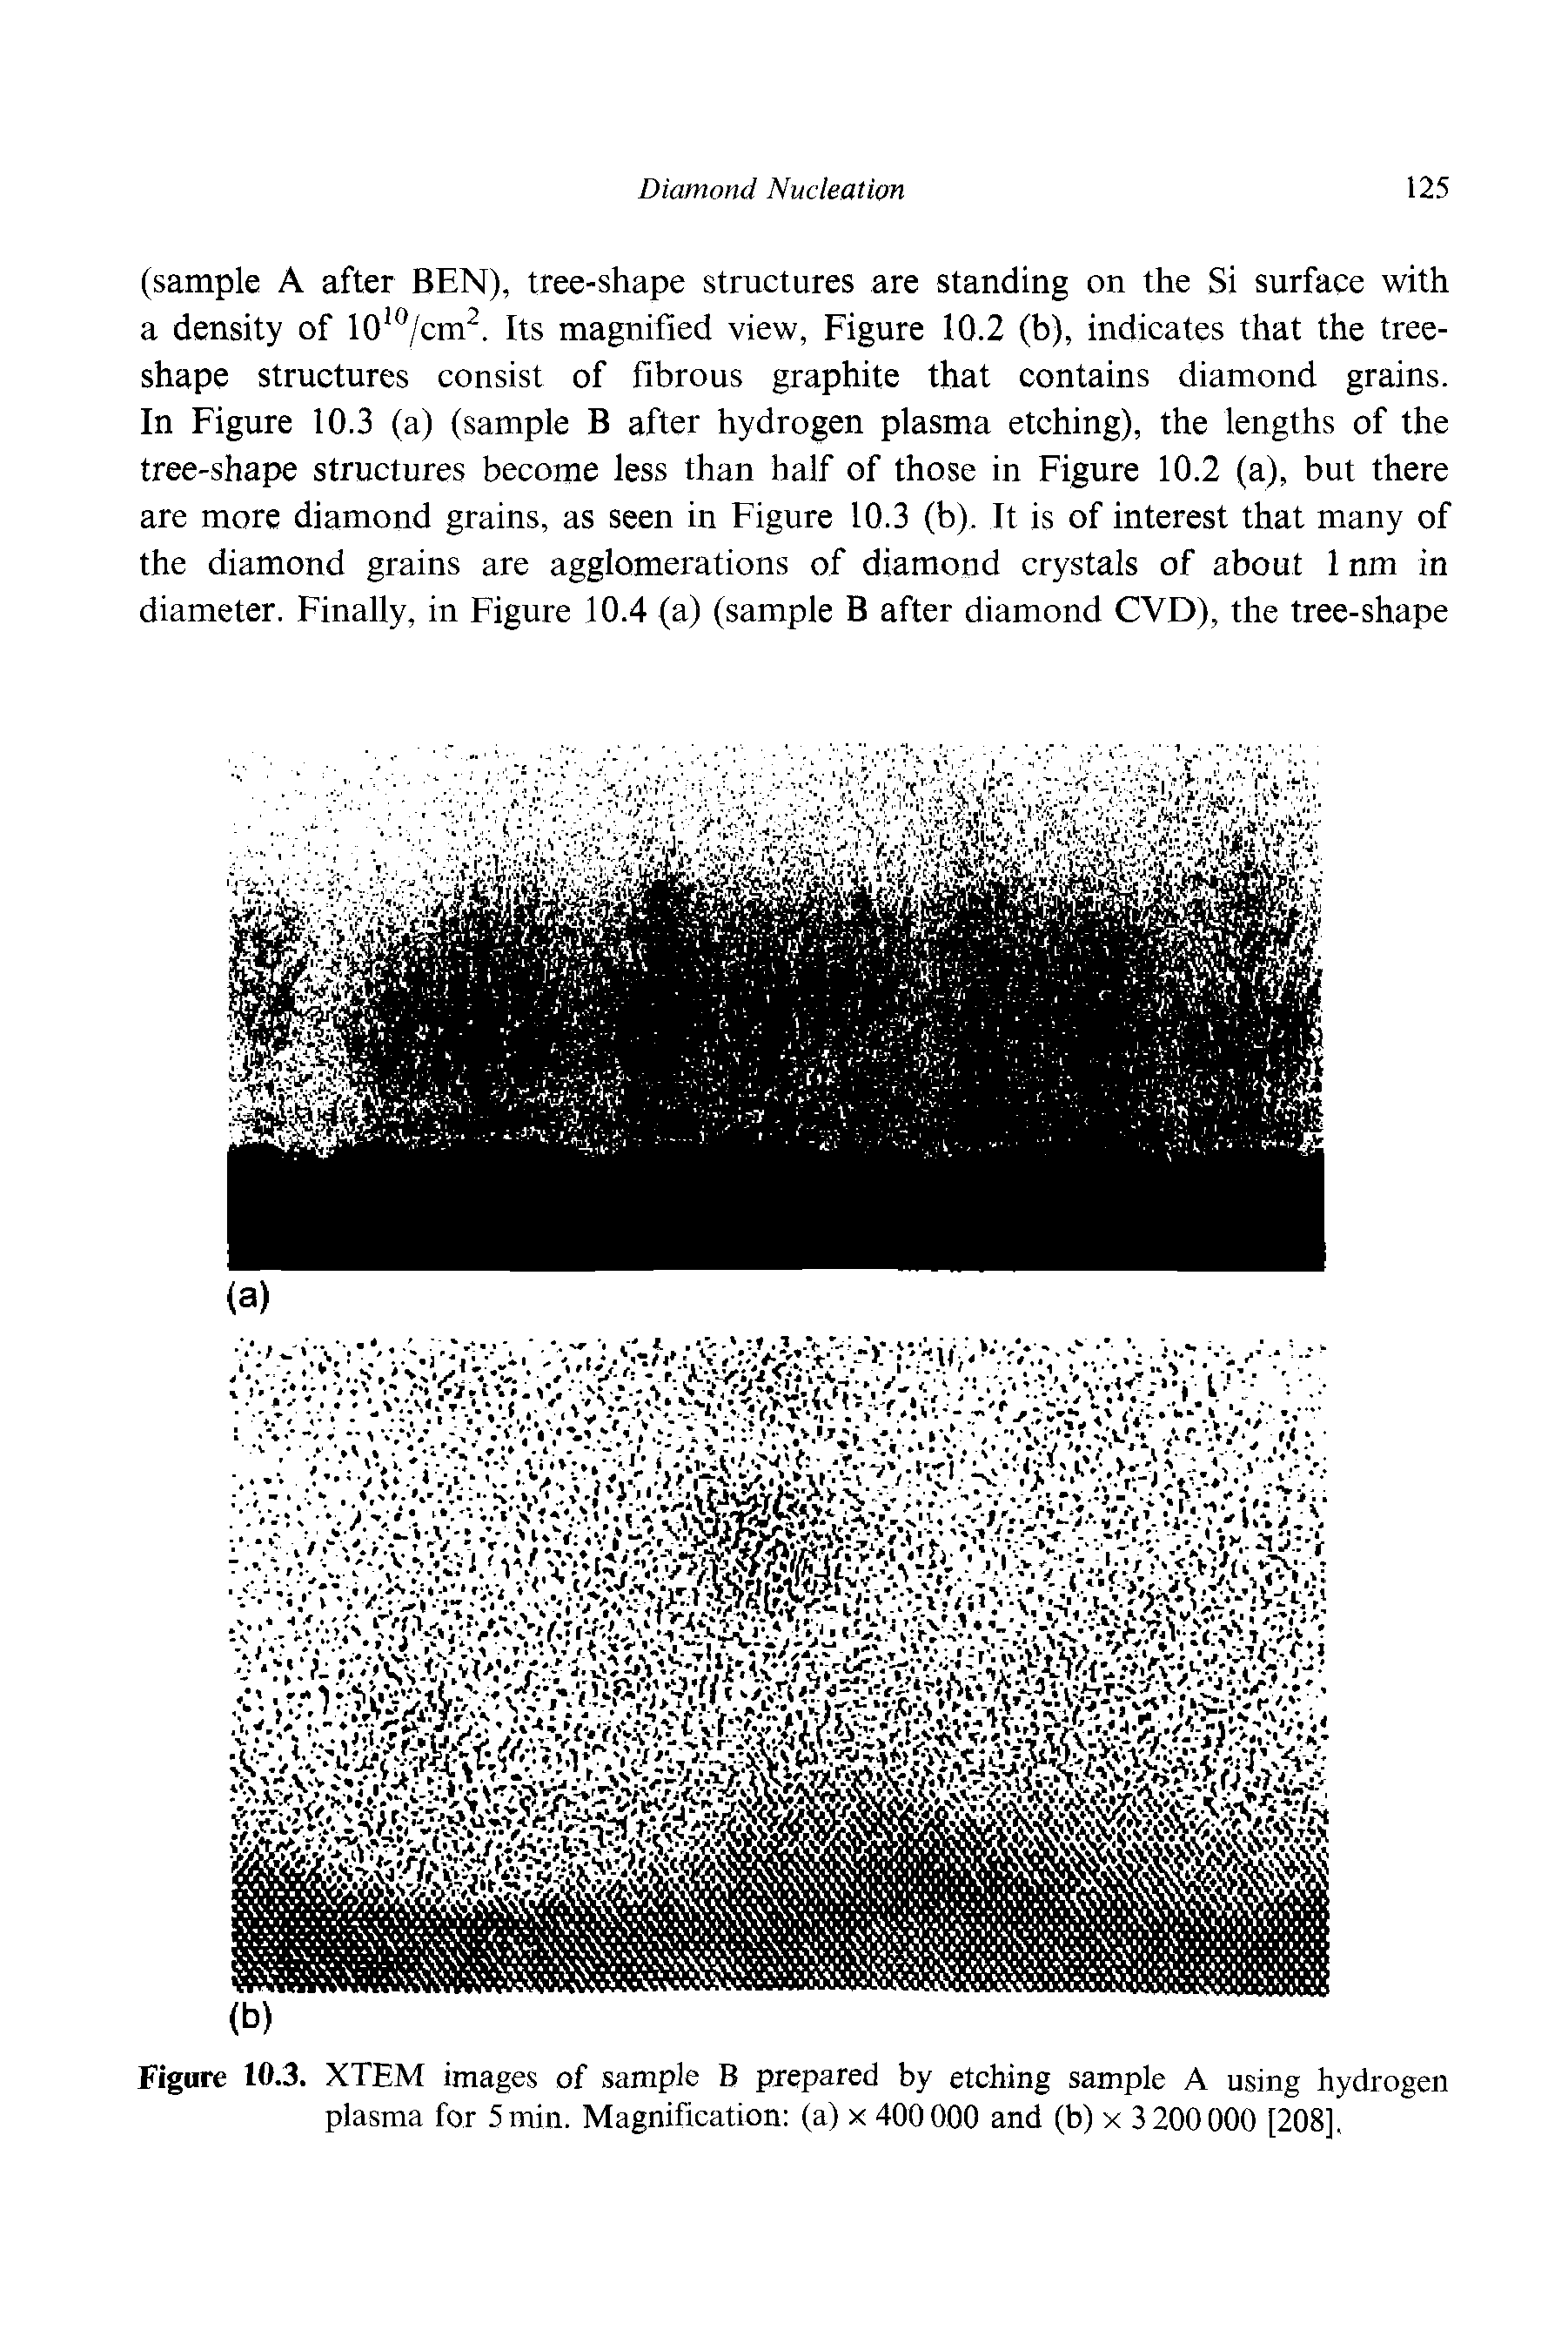 Figure 10.3. XTEM images of sample B prepared by etching sample A using hydrogen plasma for 5 min. Magnification (a) x 400000 and (b) x 3200000 [208].